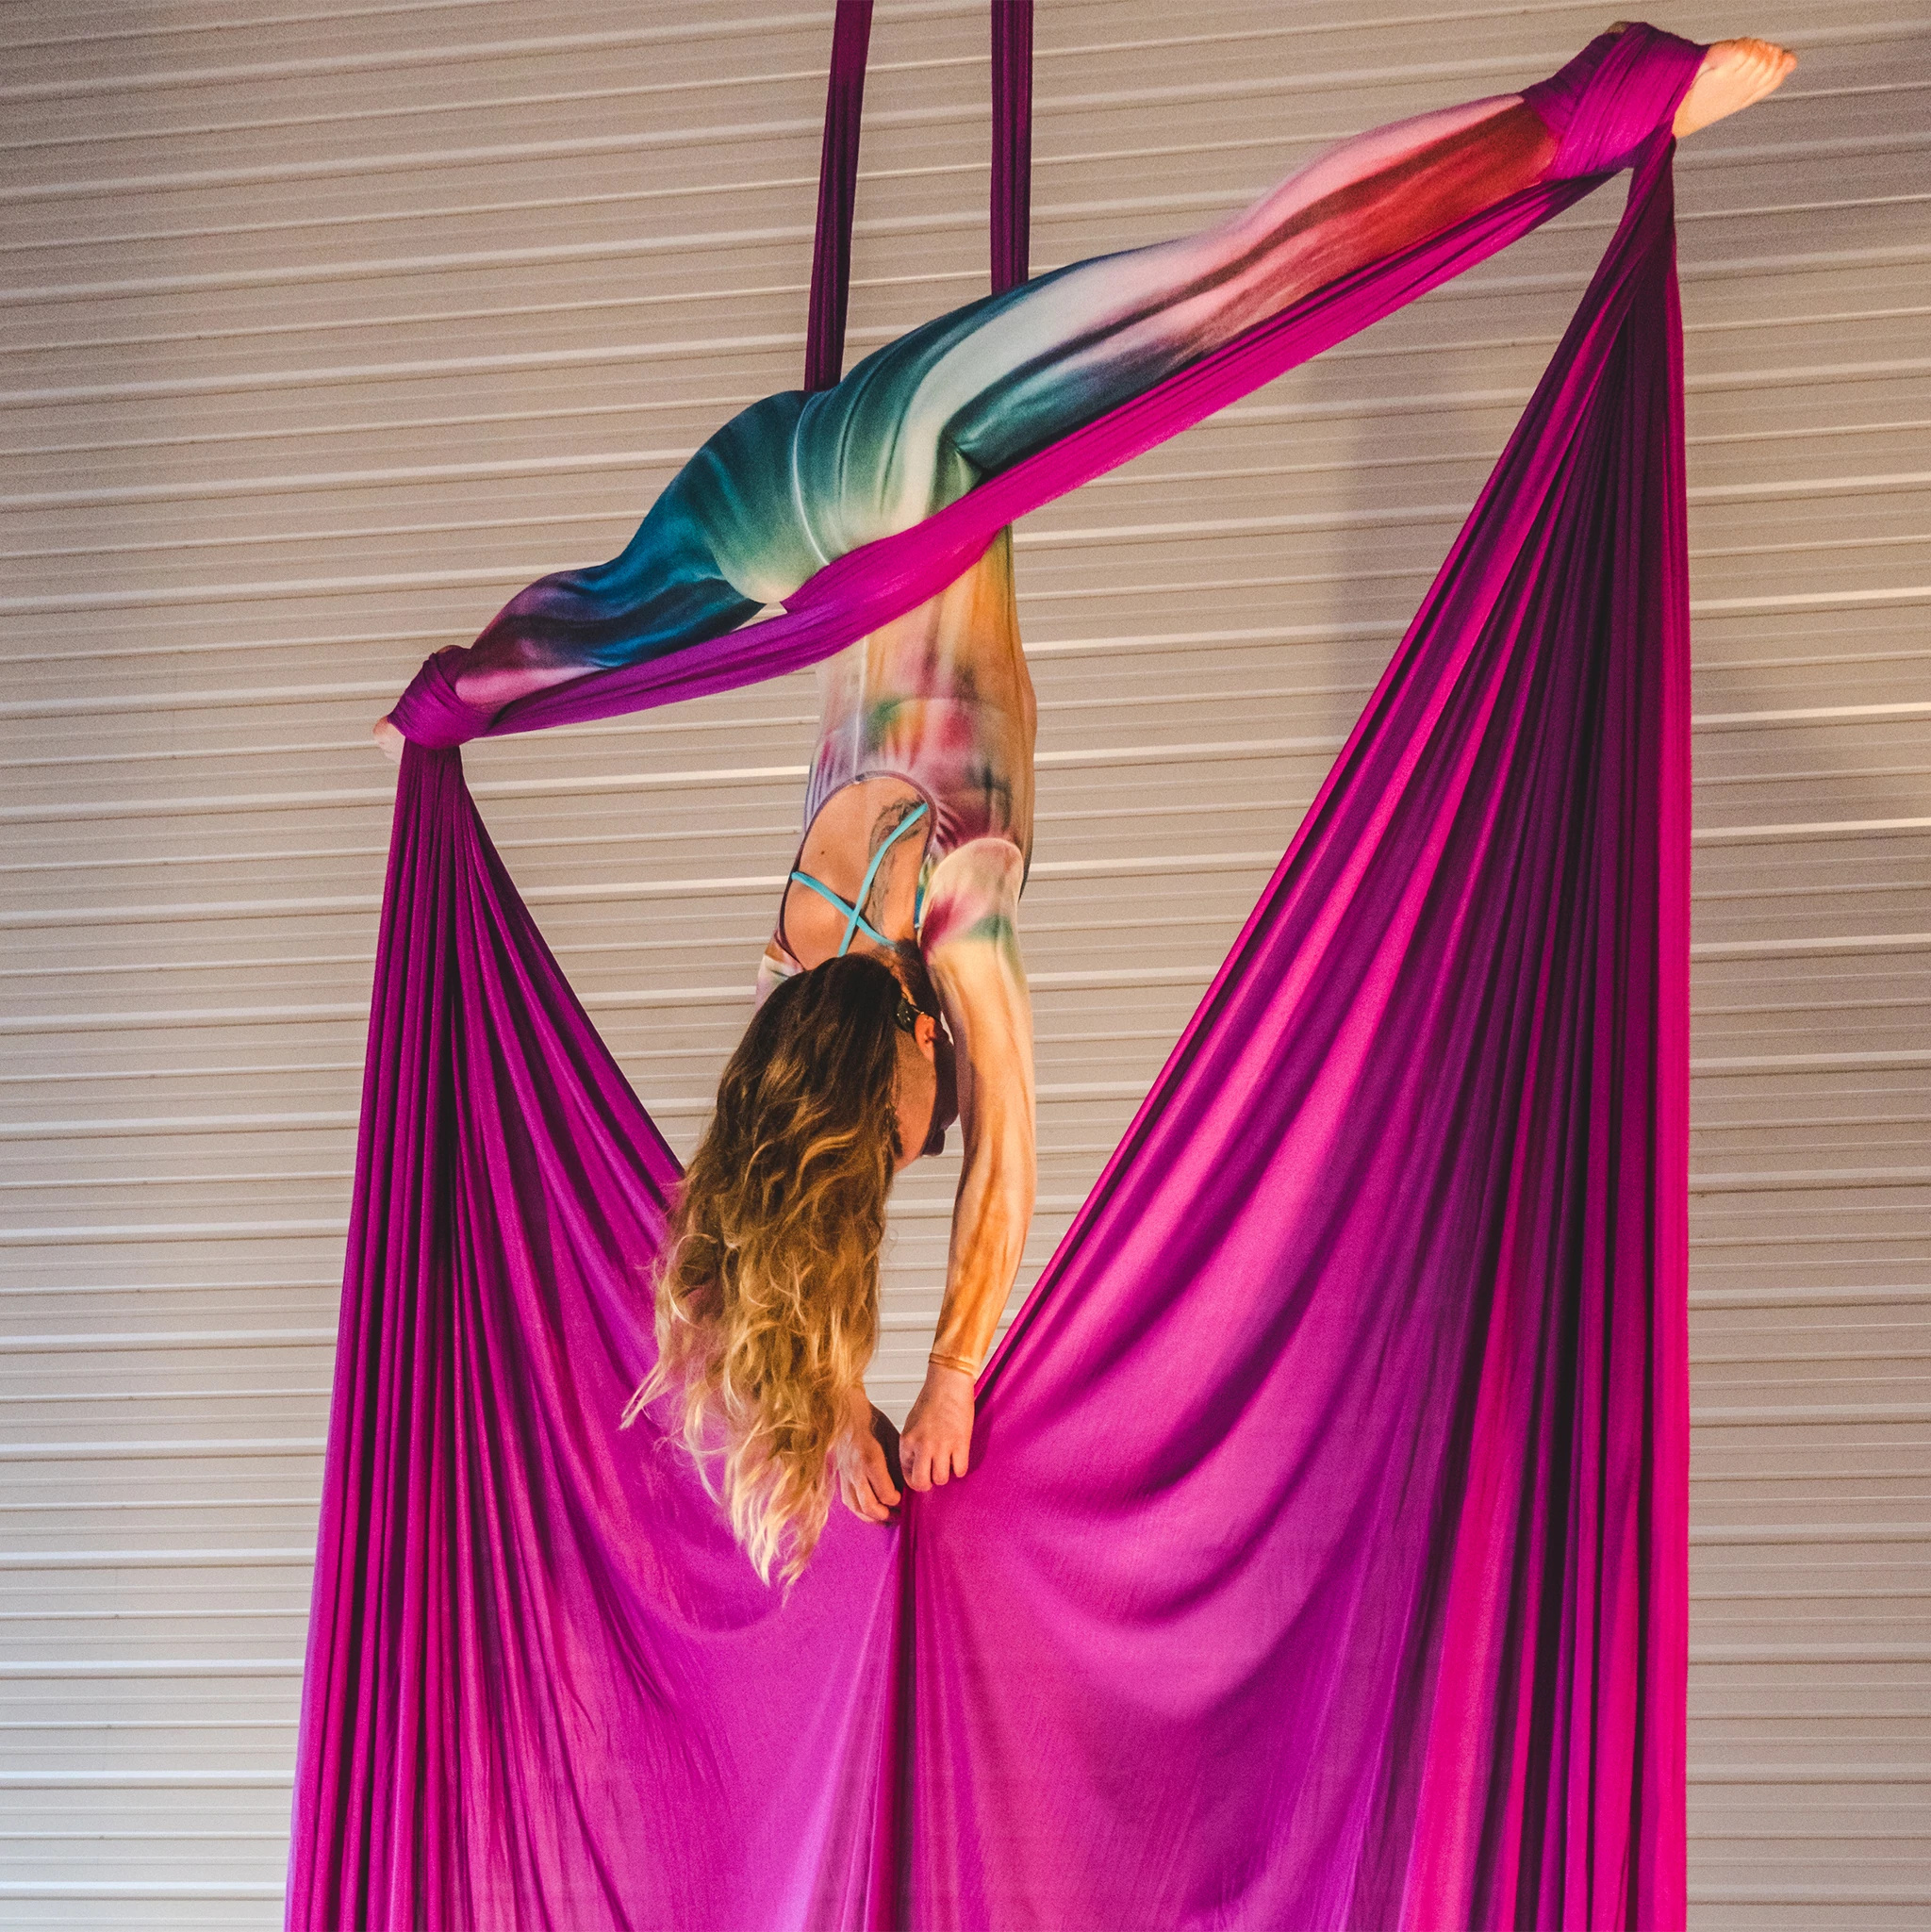 Aerial Silks: A head-stand leg-split performed by a professional female athlete in the air. 2050x2050 HD Wallpaper.